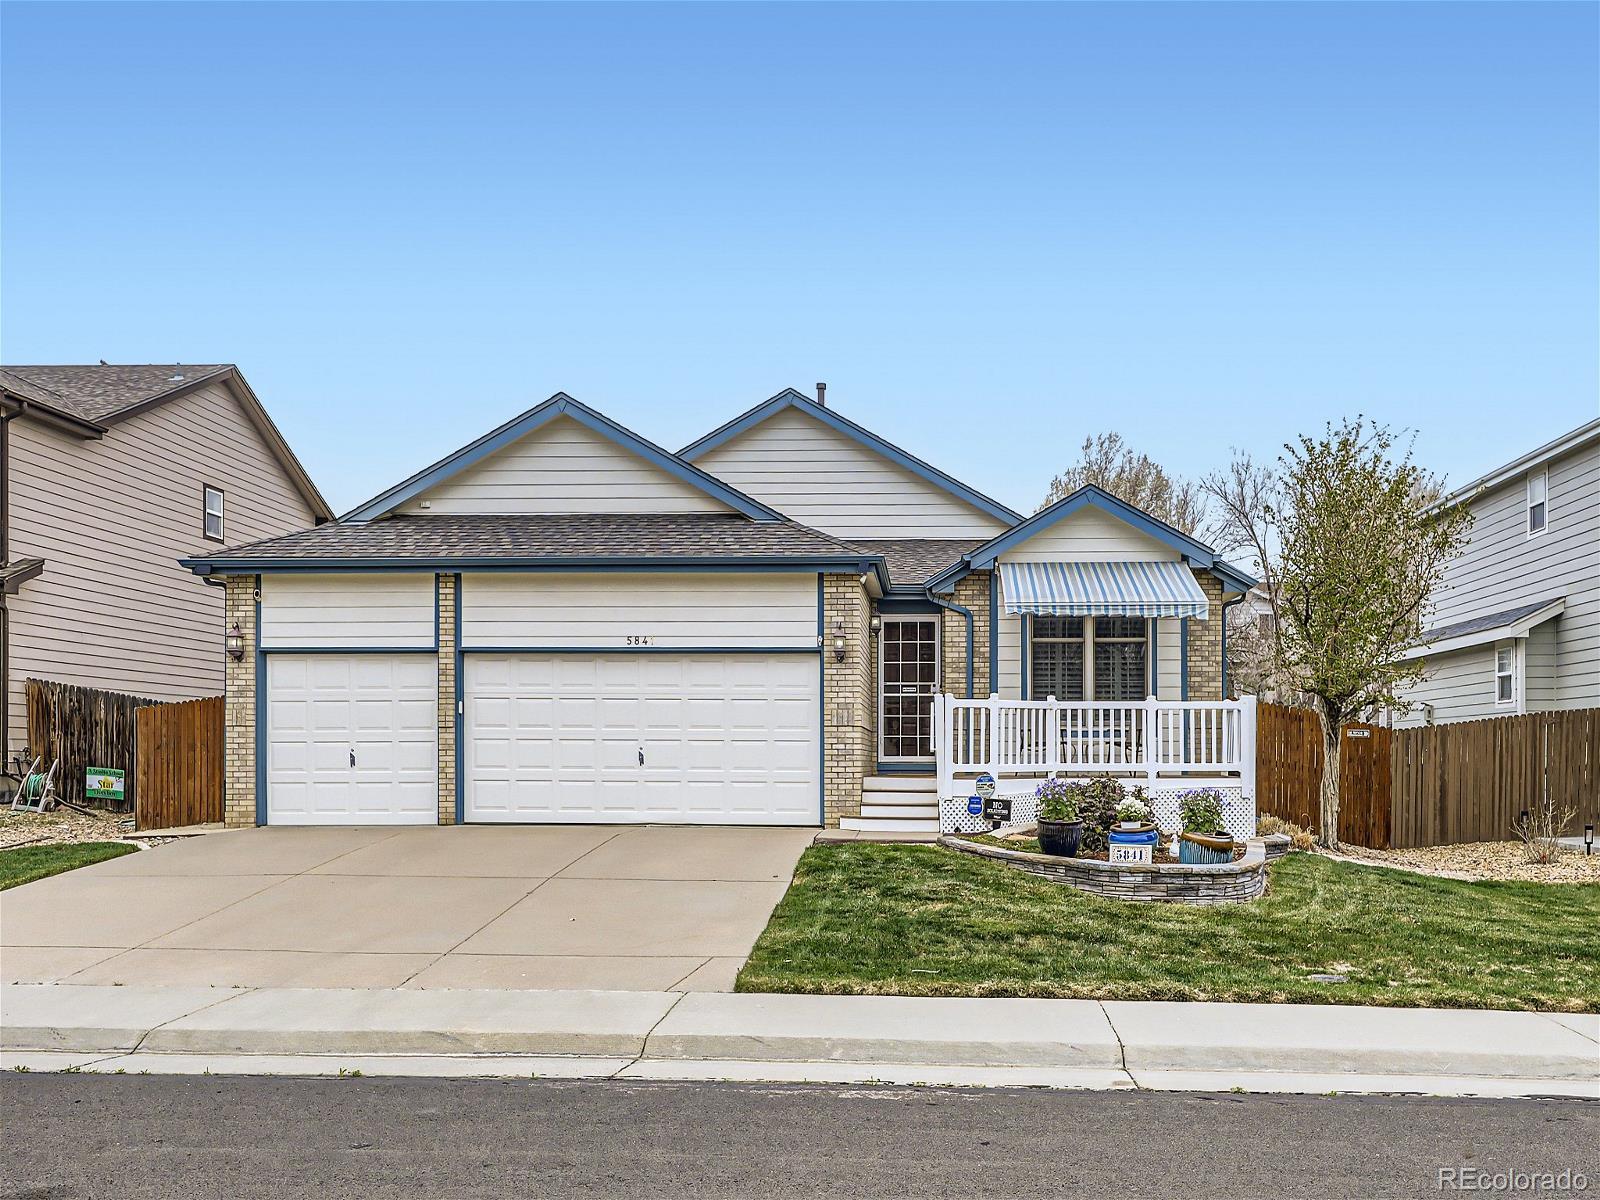 5841 E 119th Place, thornton MLS: 7401892 Beds: 4 Baths: 3 Price: $600,000